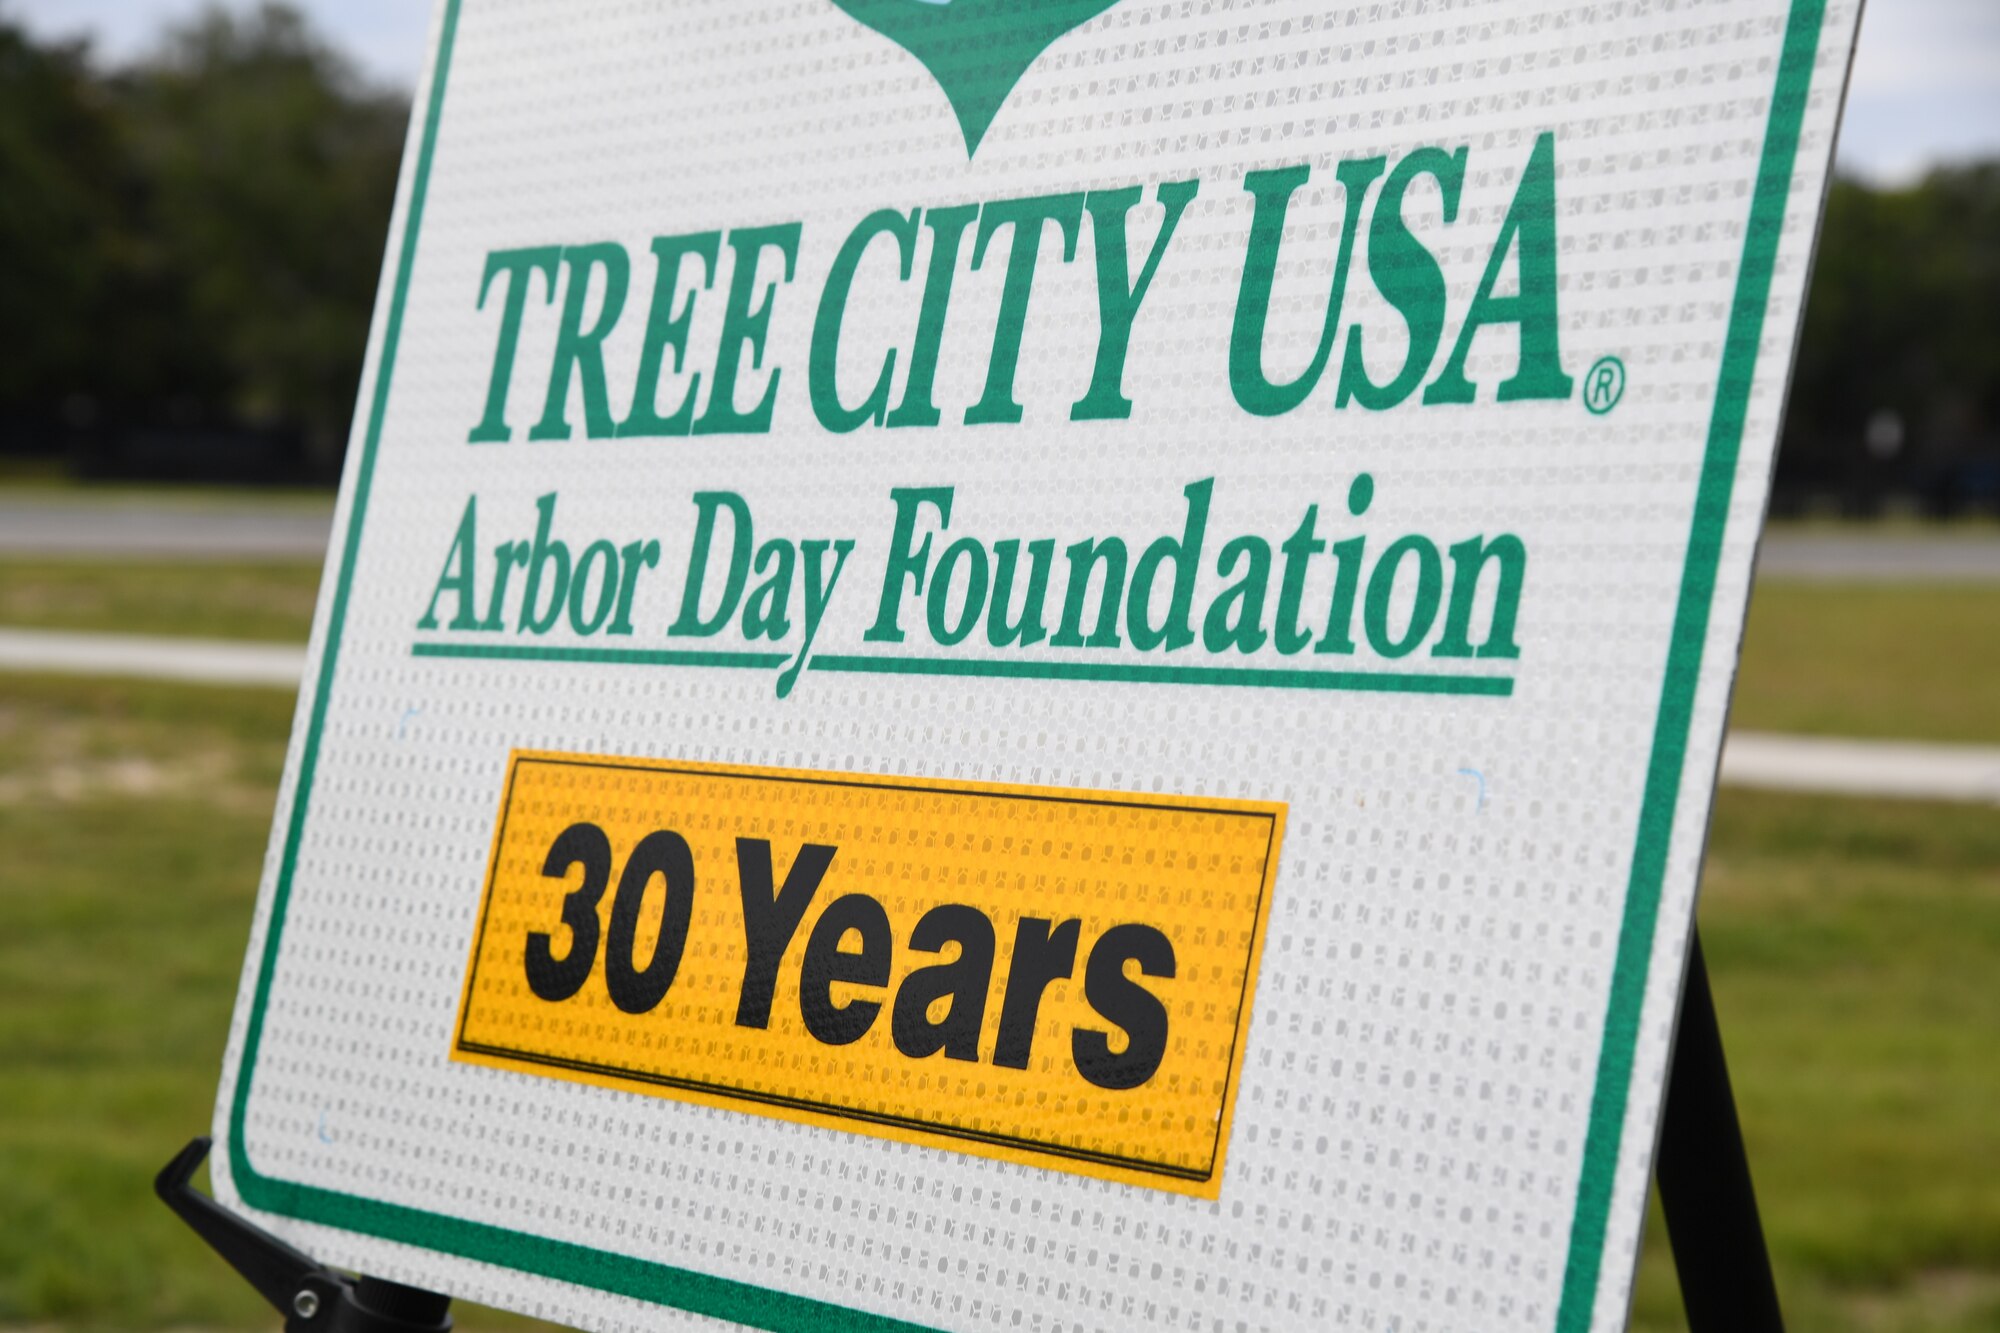 A Tree City USA 30 Year recognition sign is on display during a tree planting ceremony near the Division Street Gate at Keesler Air Force Base, Mississippi, April 24, 2023.